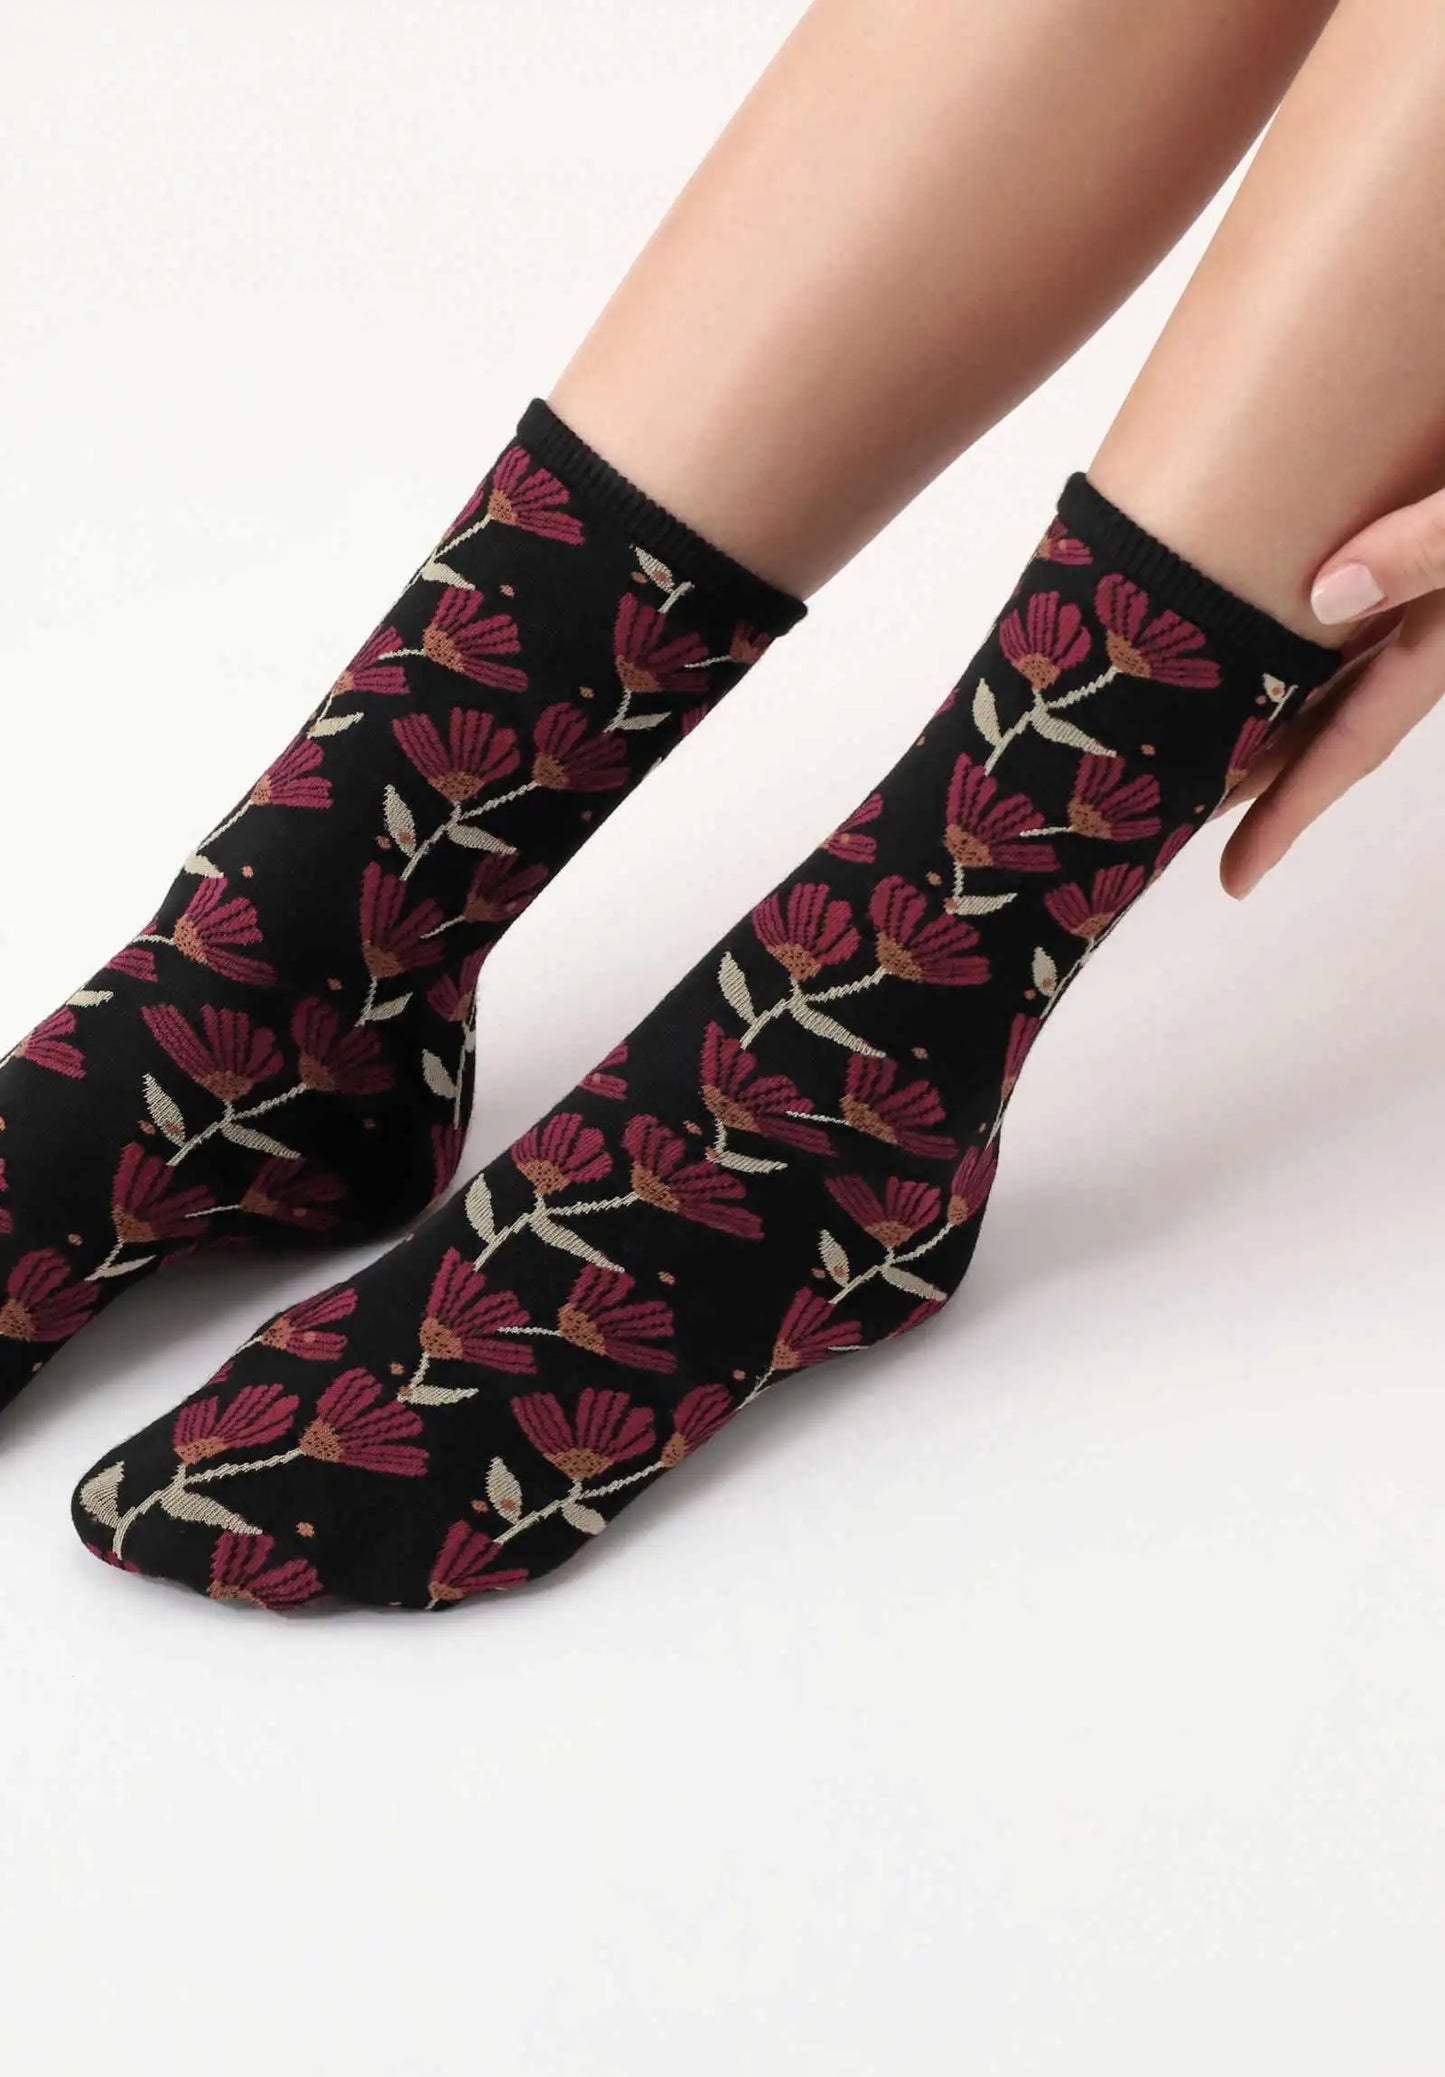 Oroblù Bloom Calzini - Black viscose mix fashion ankle socks with an all over woven floral pattern in wine, rusty orange and cream.